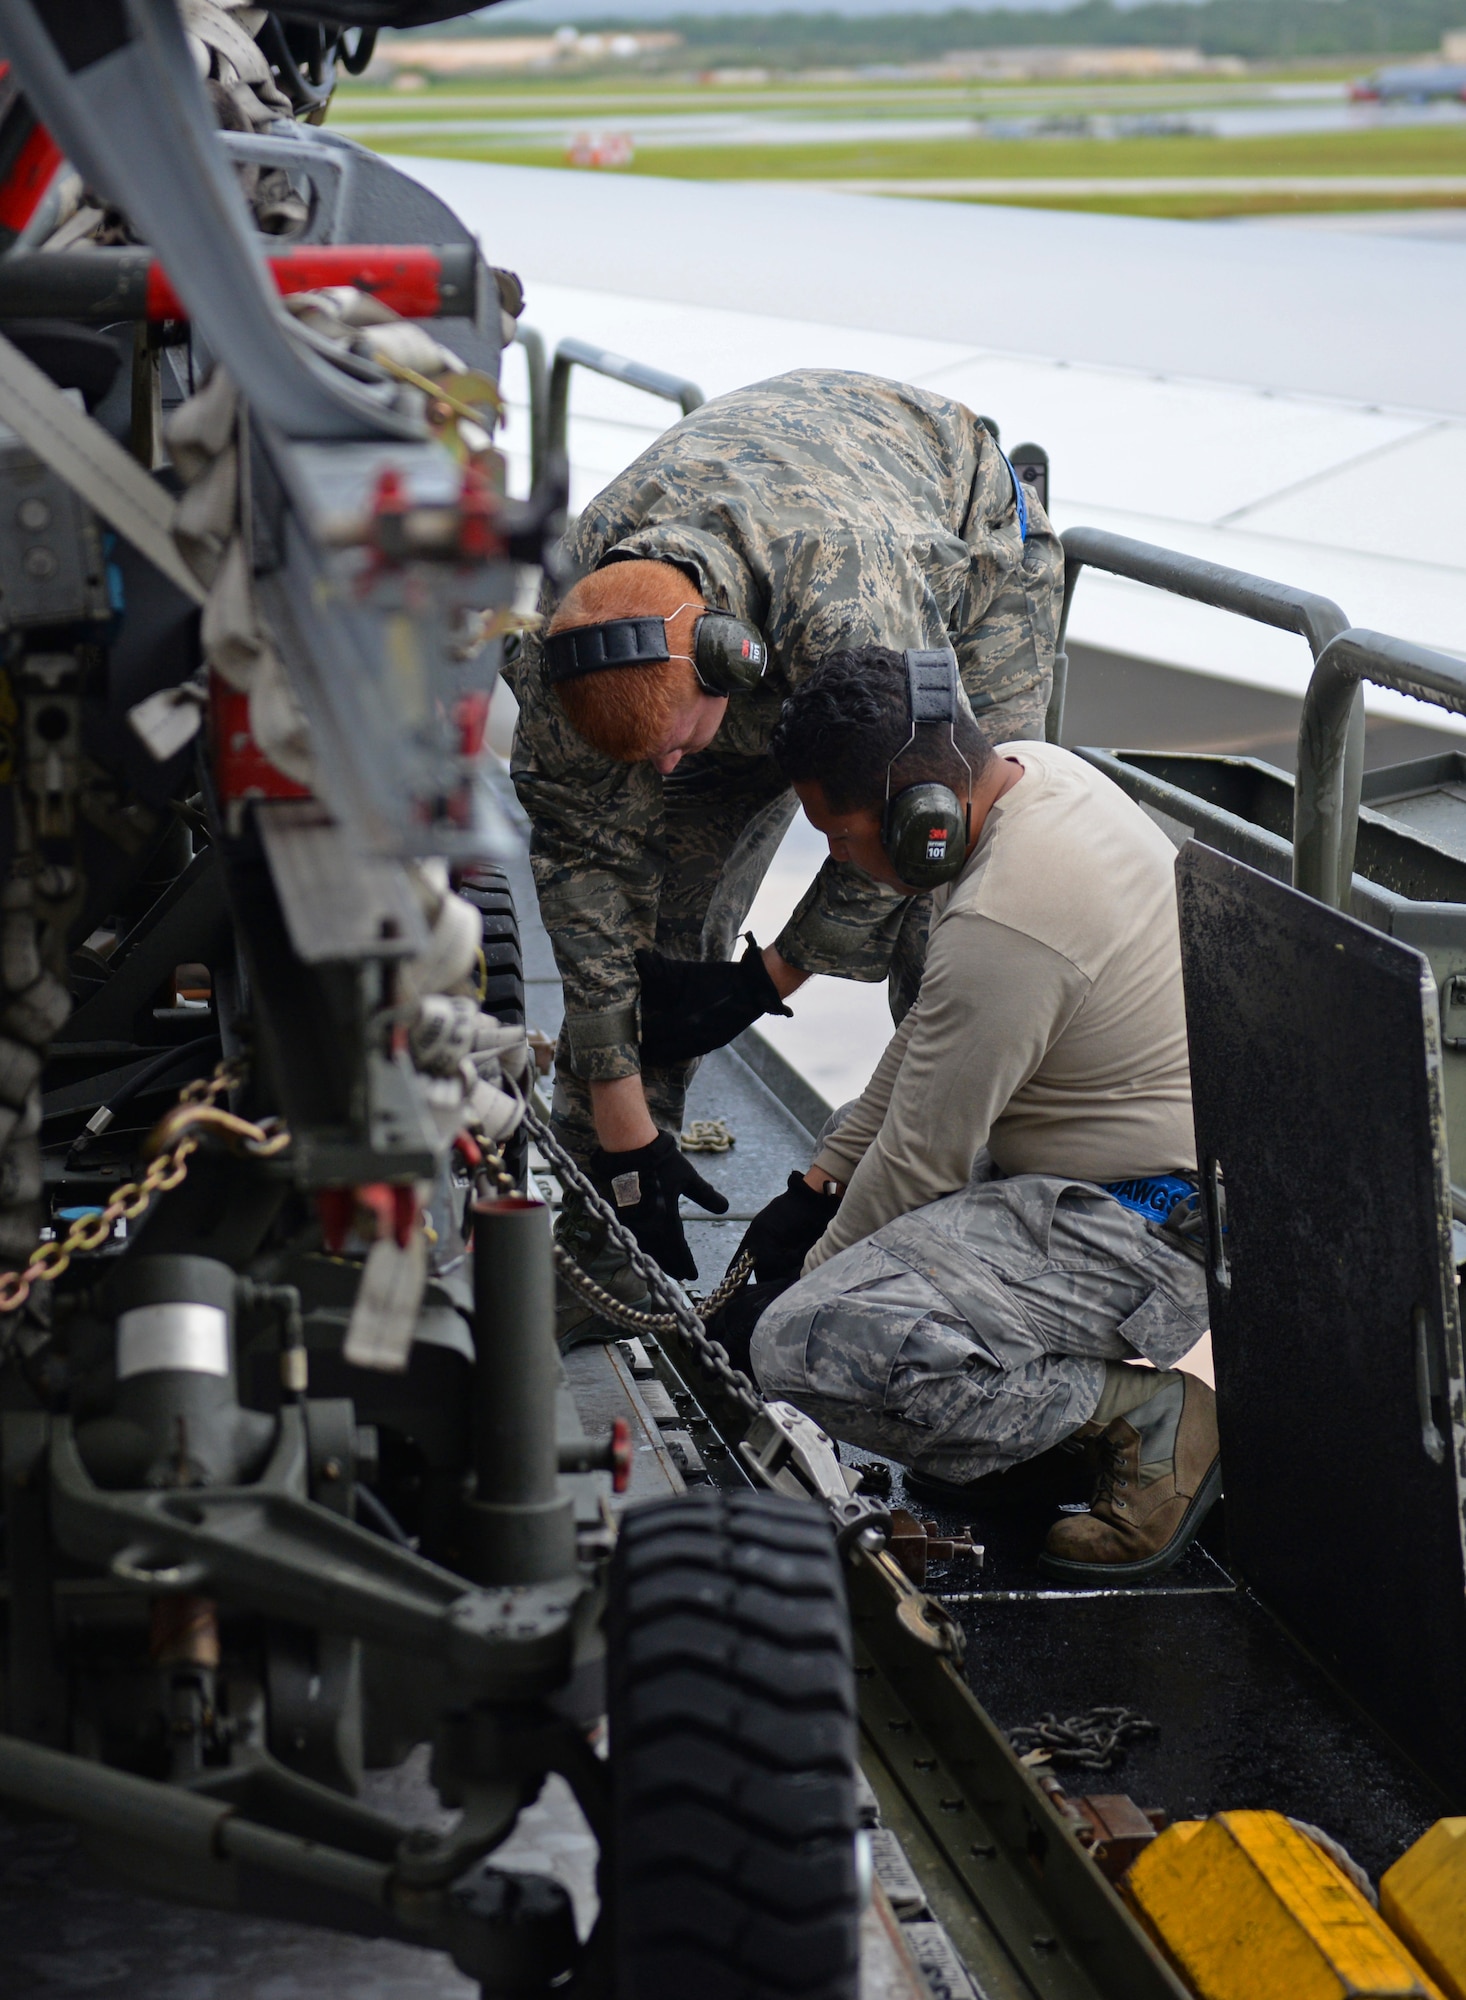 Staff Sgt. Vincent Lim, 734th Aircraft Mobility Squadron load team chief, and Airman Zachary Puerner, left, 734th AMS aircraft services technician, tie down cargo on a Tunner 60K aircraft cargo loader Sept. 7, 2016, at Andersen Air Force Base, Guam. The 734th AMS provides the capability to move cargo, personnel and equipment at a high velocity, ensuring Andersen AFB is prepared to meet mission requirements.(U.S. Air Force photo by Airman 1st Class Jacob Skovo)